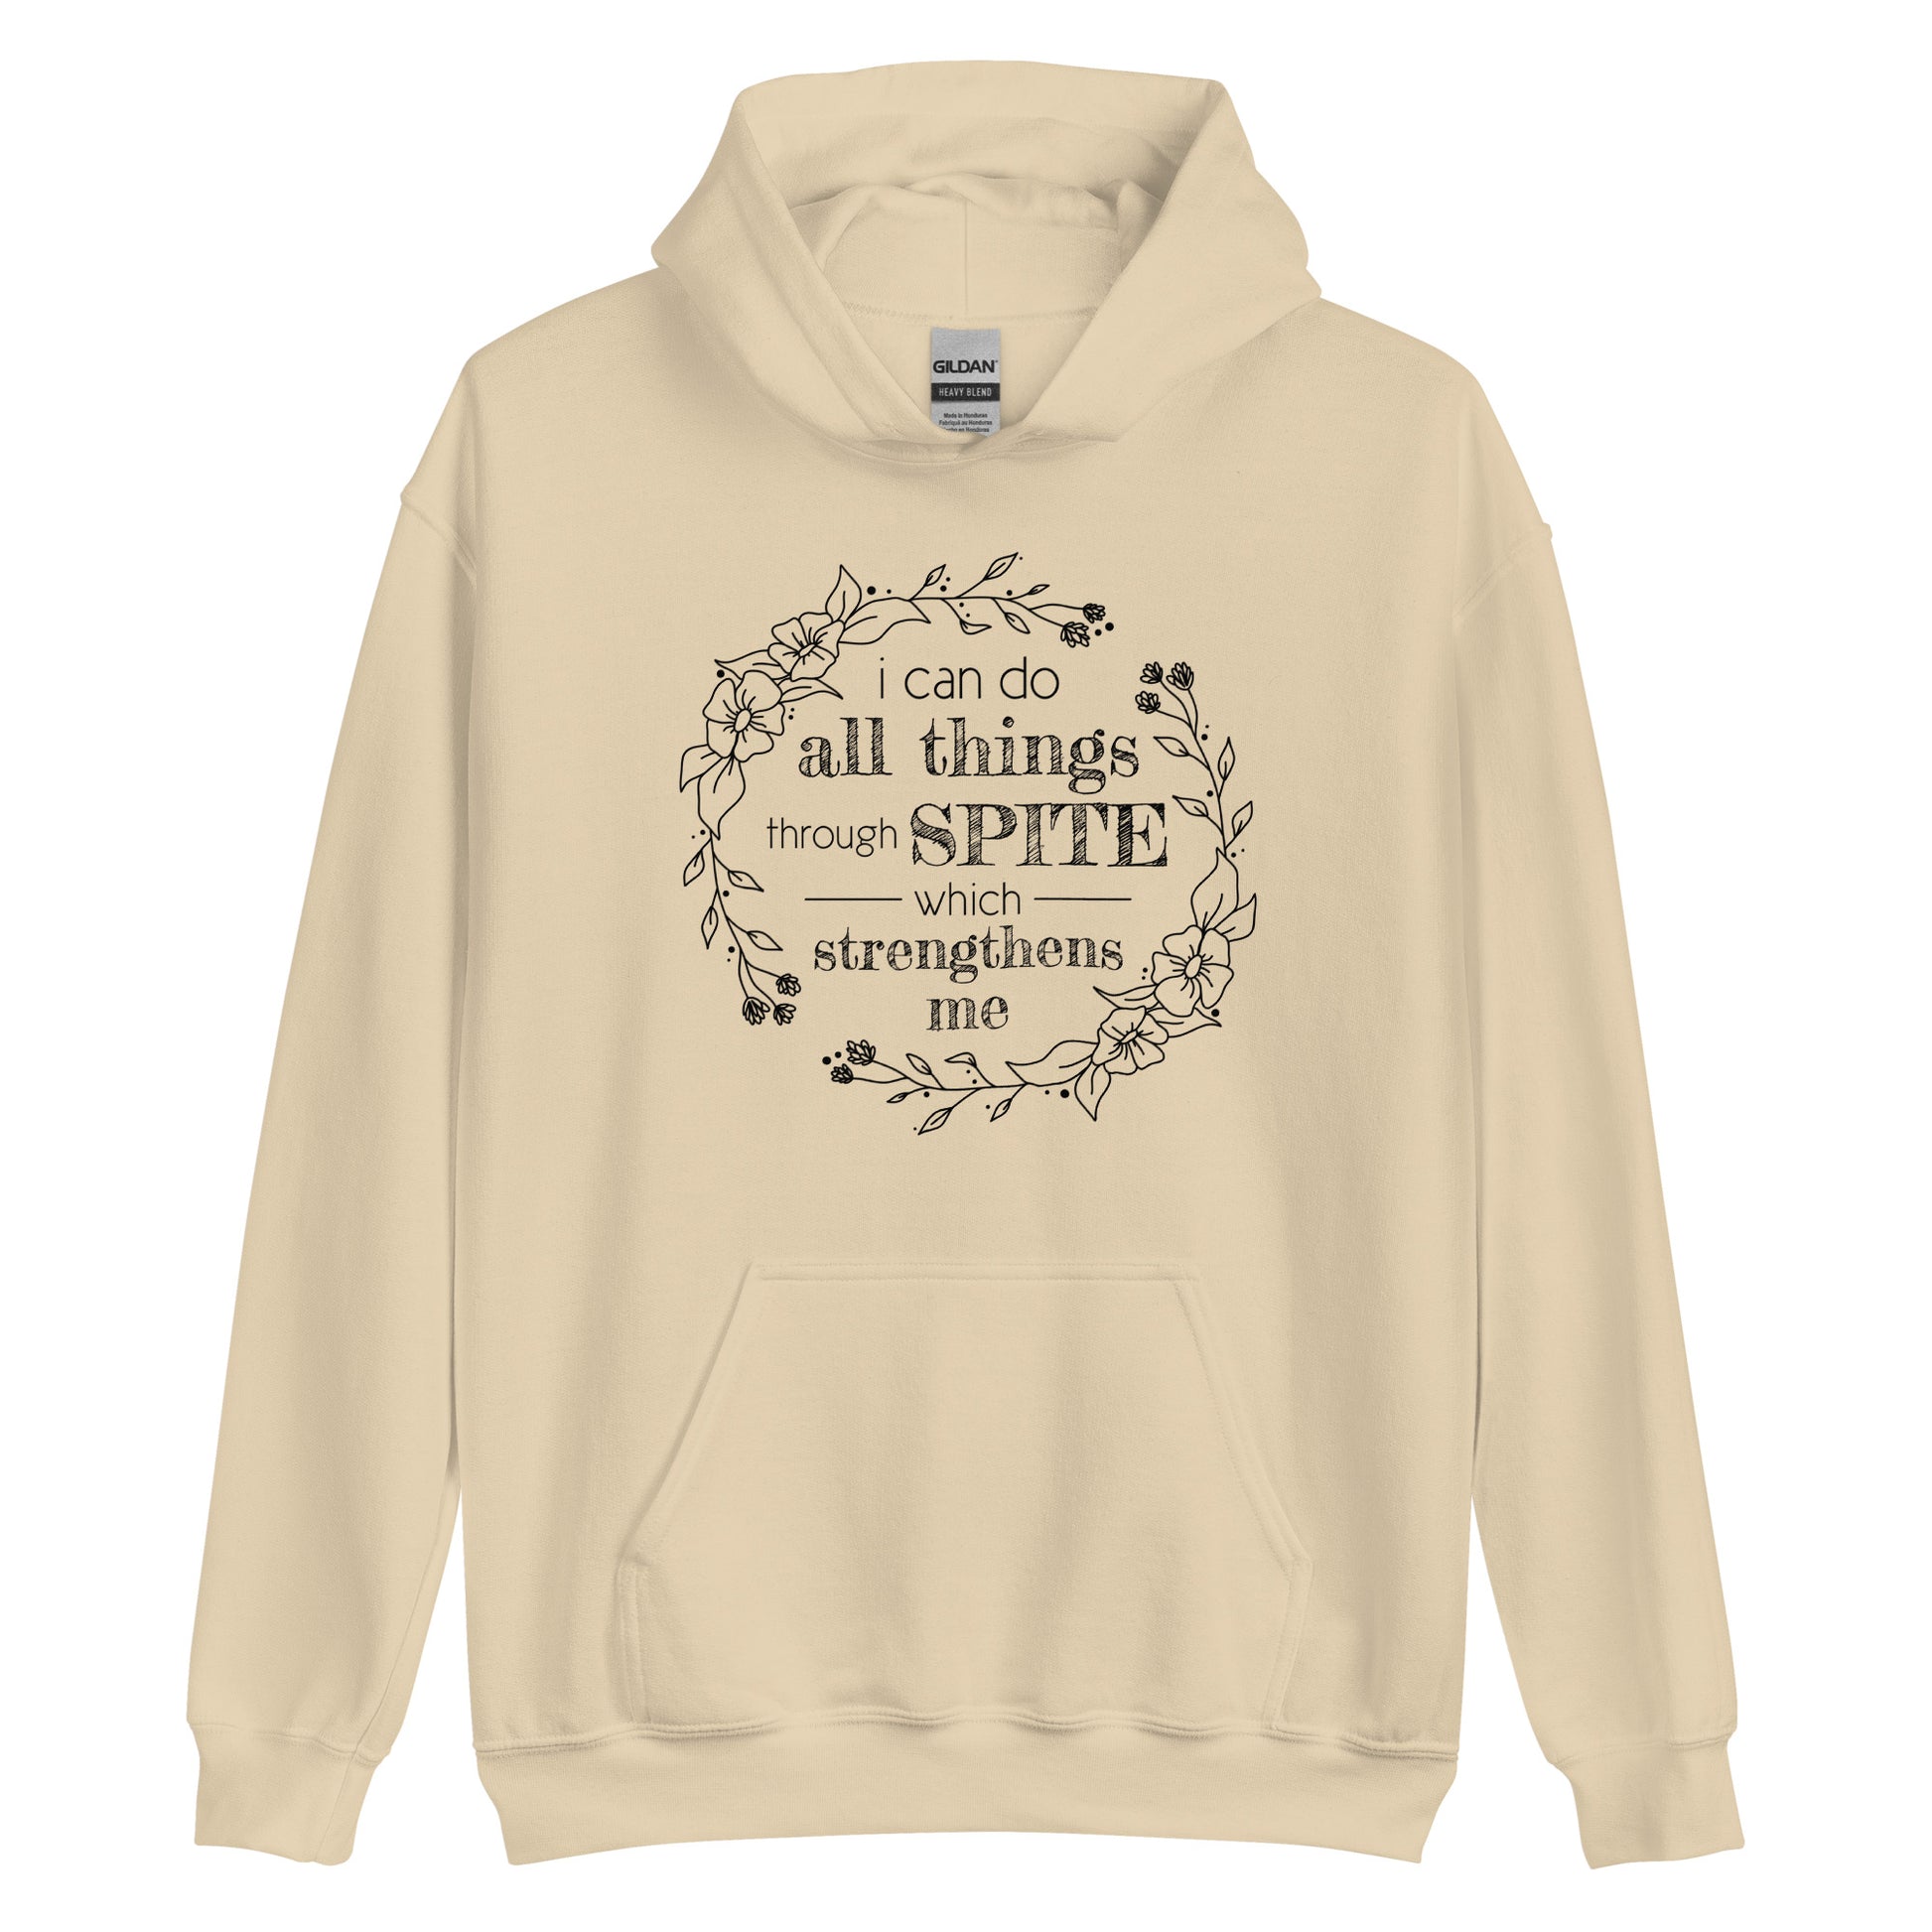 A tan hooded sweatshirt featuring an illustration of a floral wreath. Text inside the flowers reads "i can do all things through SPITE which strengthens me"